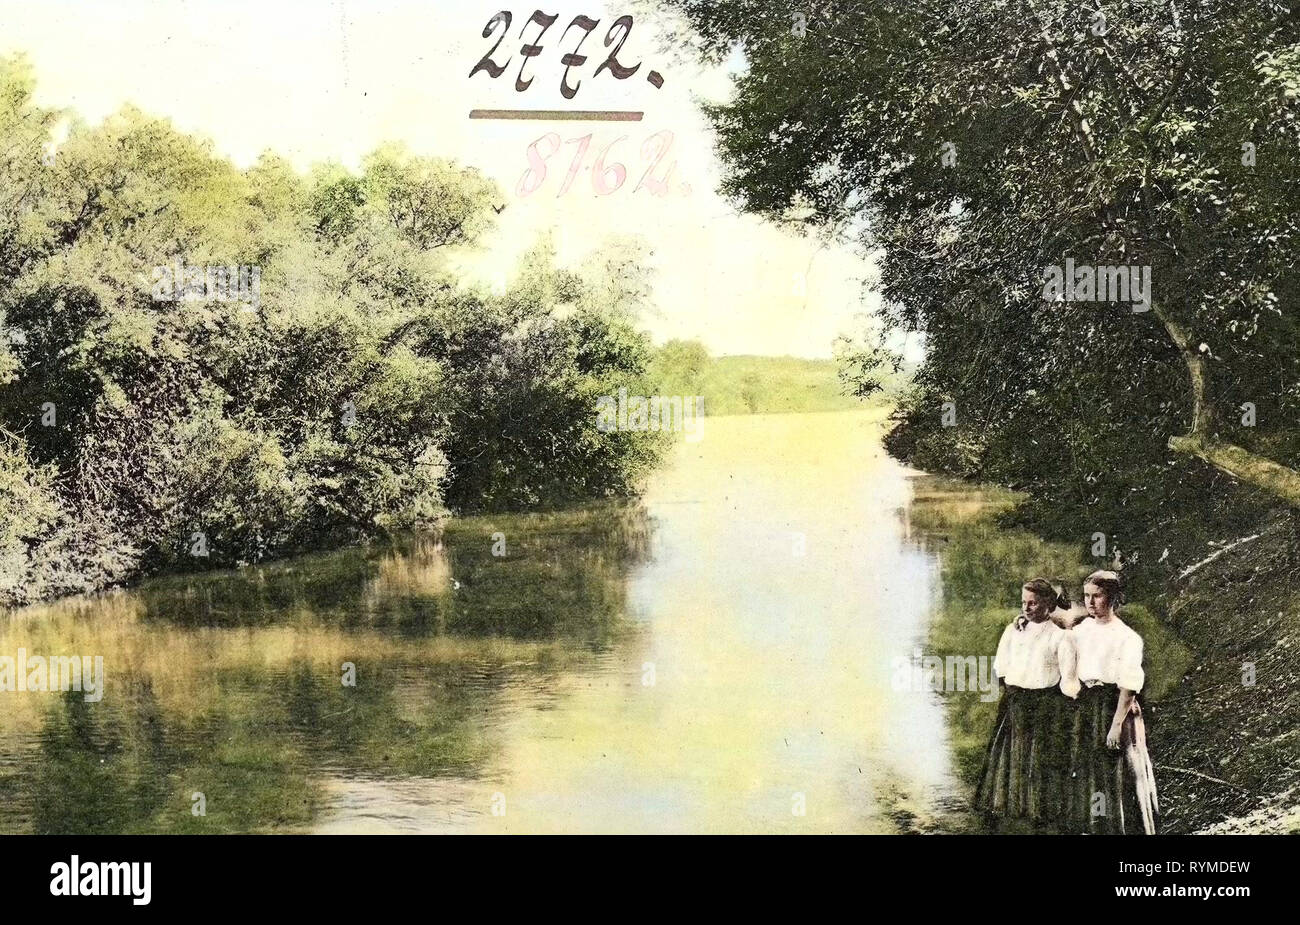 Rivers of California, Portraits with 2 people, Redding, California, 1906, Cal., River View', United States of America Stock Photo